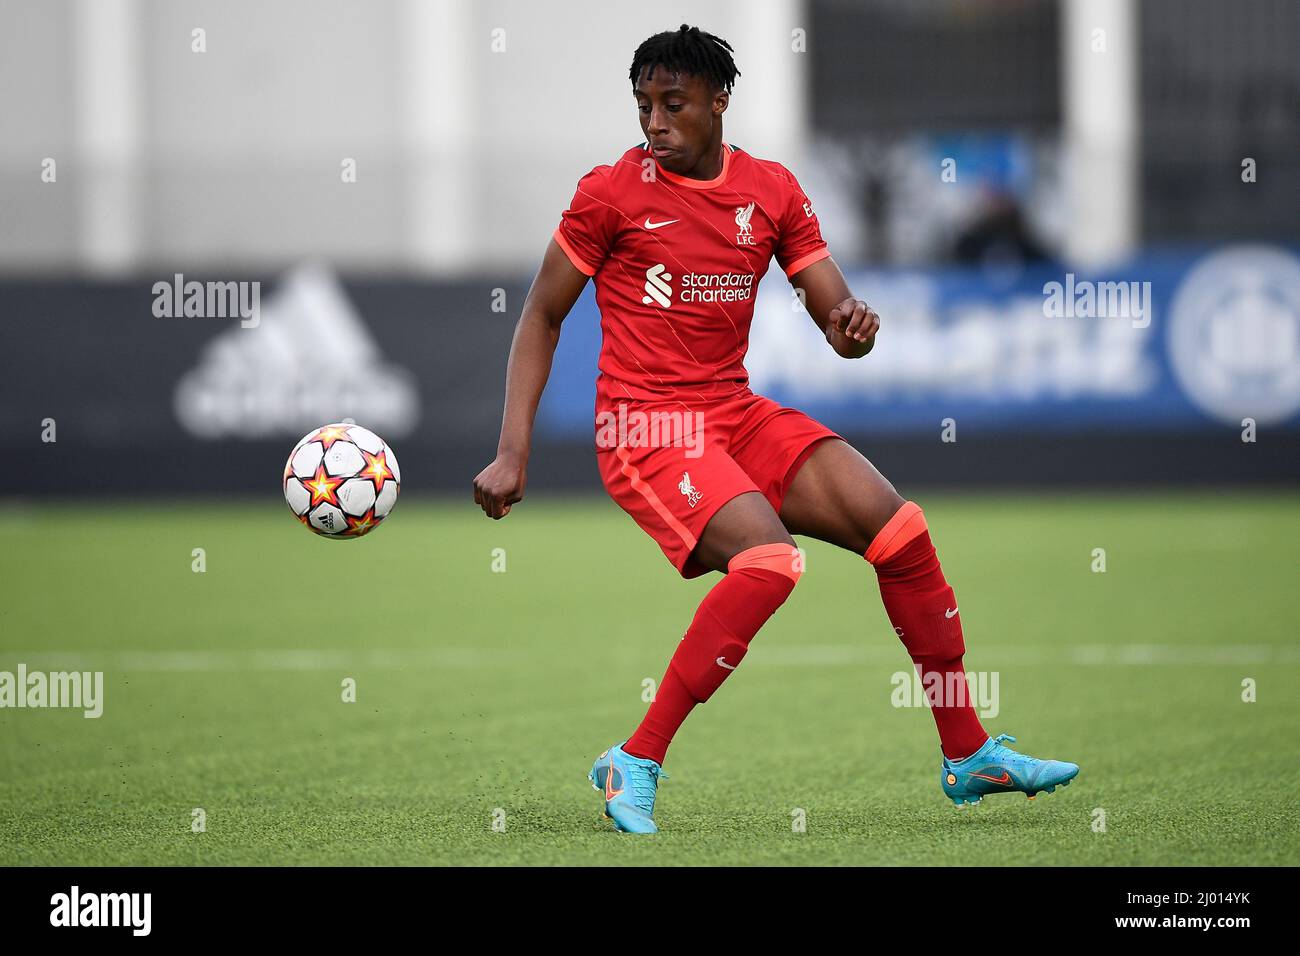 Vinovo, Italy. 15 March 2022. Isaac Mabaya of Liverpool FC U19 during the UEFA Youth League quarterfinal football match between Juventus FC U19 and Liverpool FC U19. Credit: Nicolò Campo/Alamy Live News Stock Photo